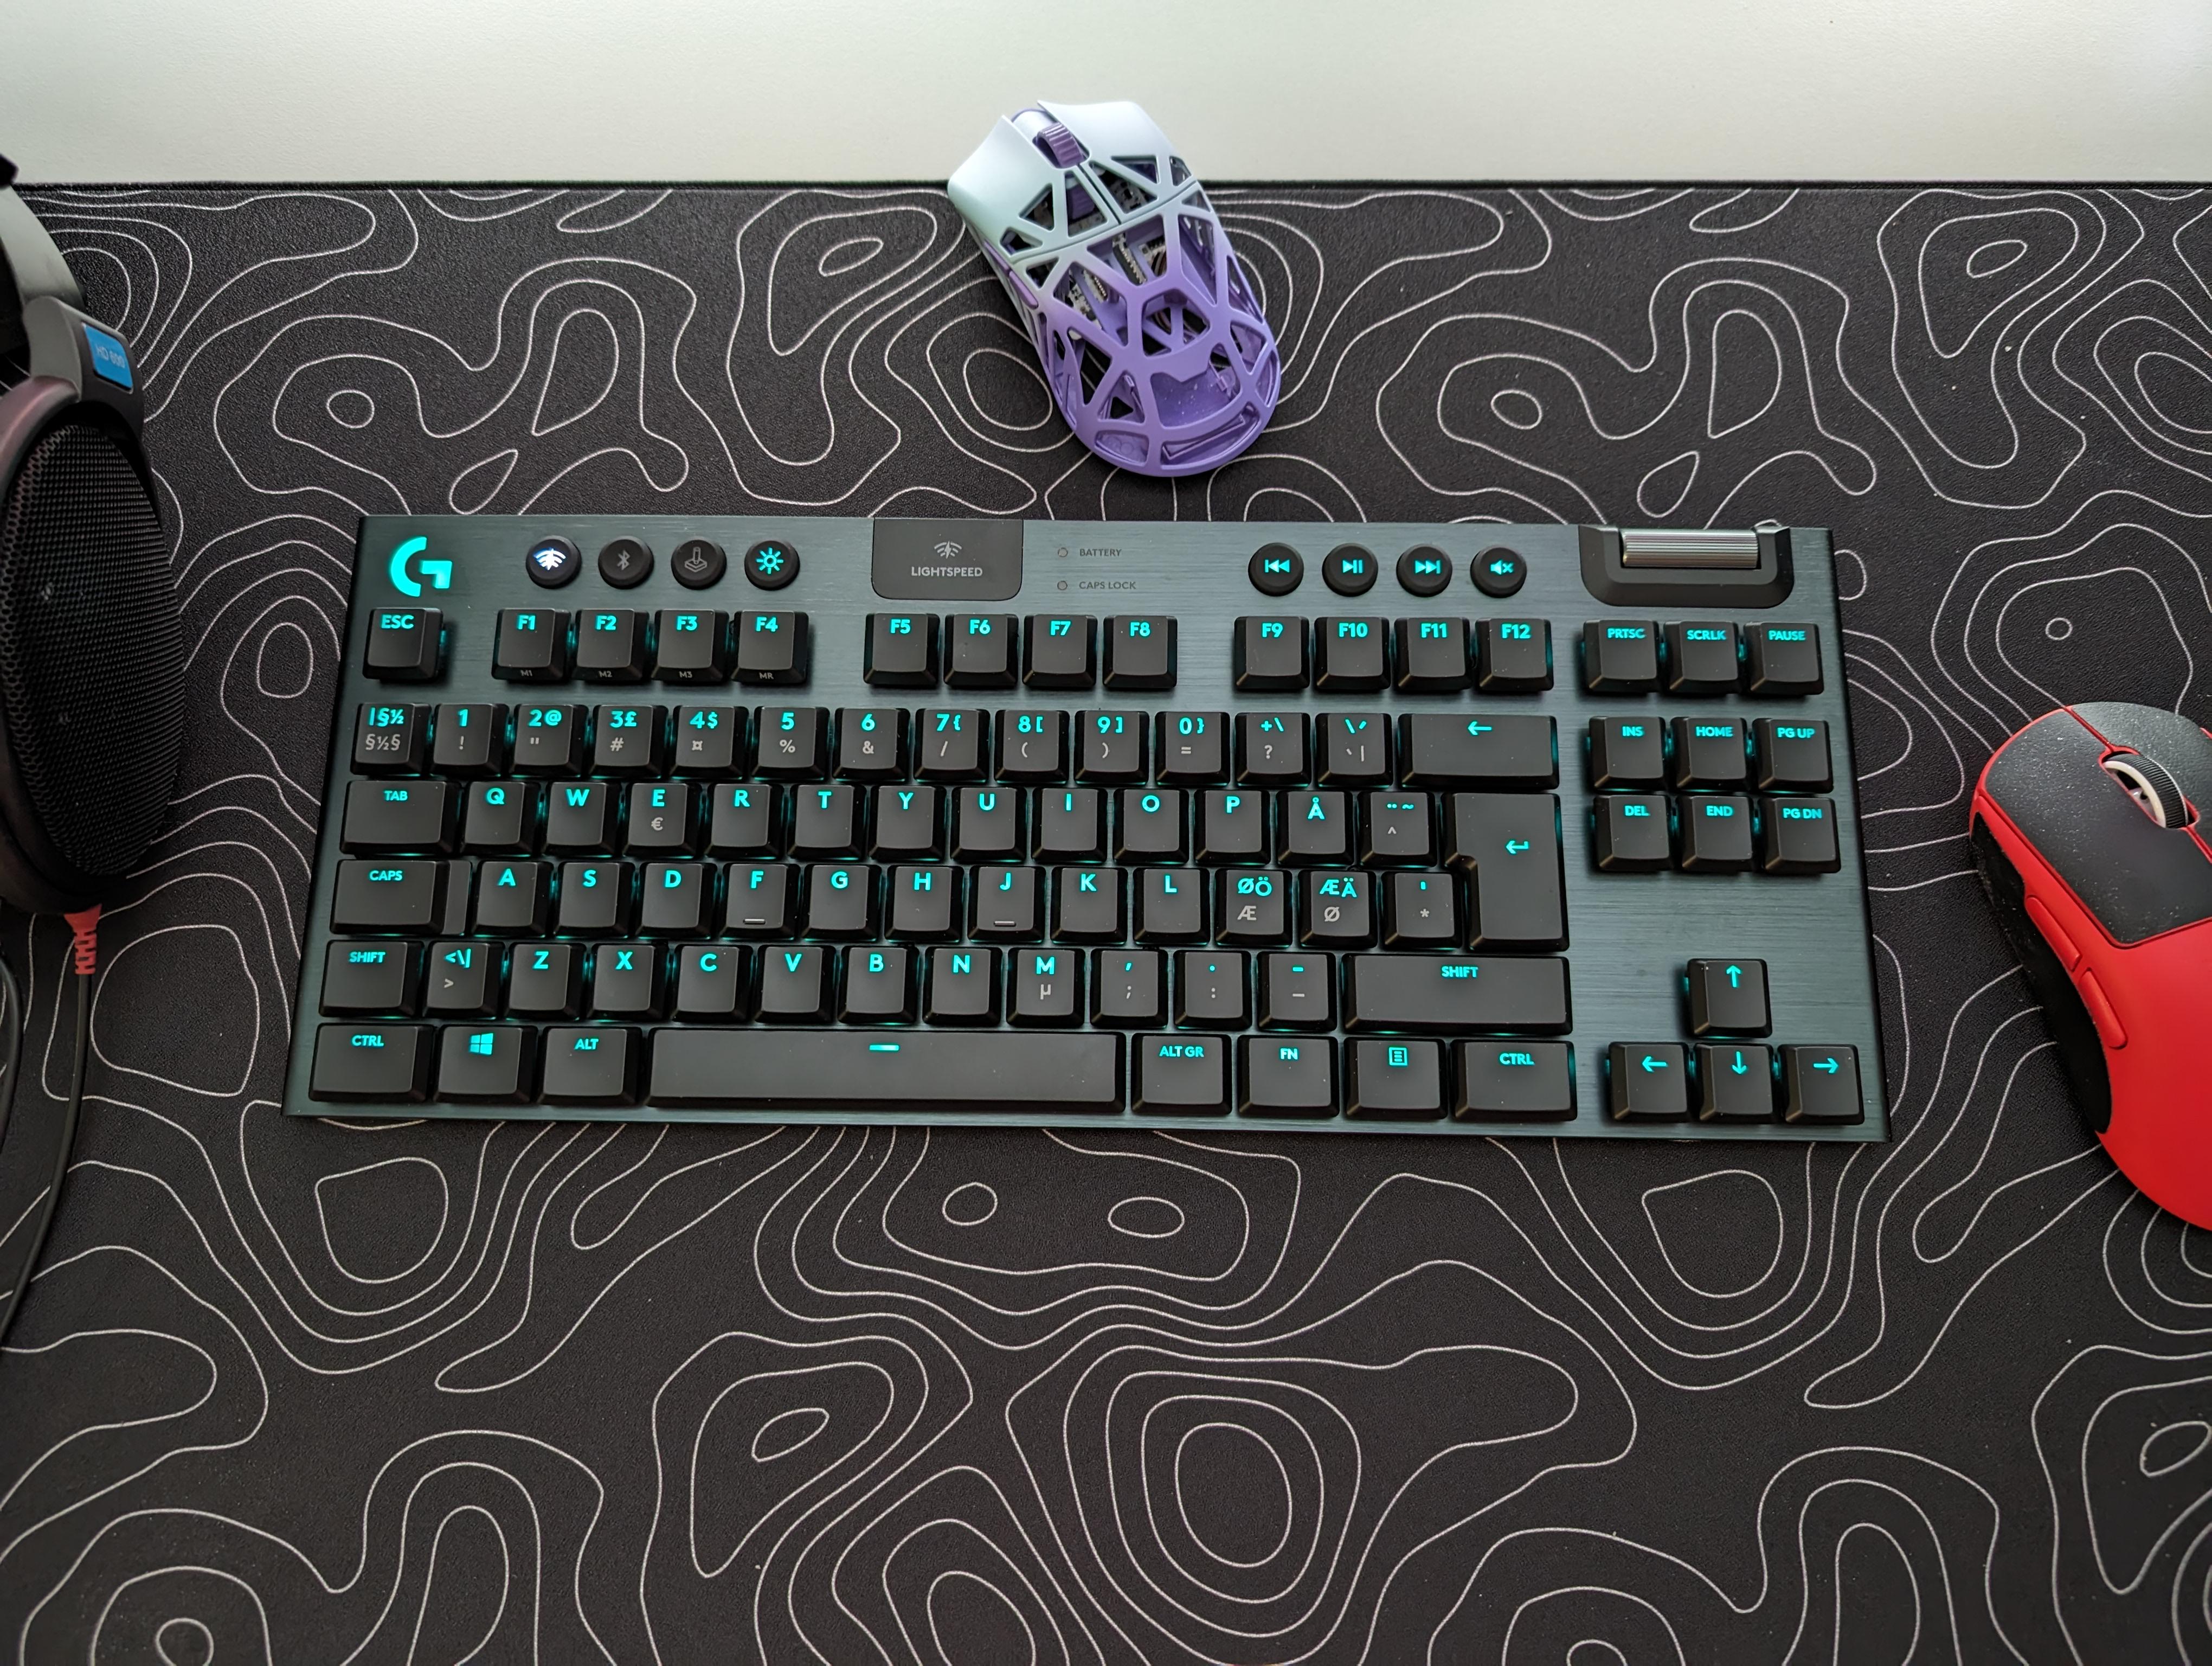 r/pcmasterrace - My girlfriend surprised me and bought Logitech G915 TKL saying "i knew you wanted it when you picked it up and held it at the store the other day" she's the best